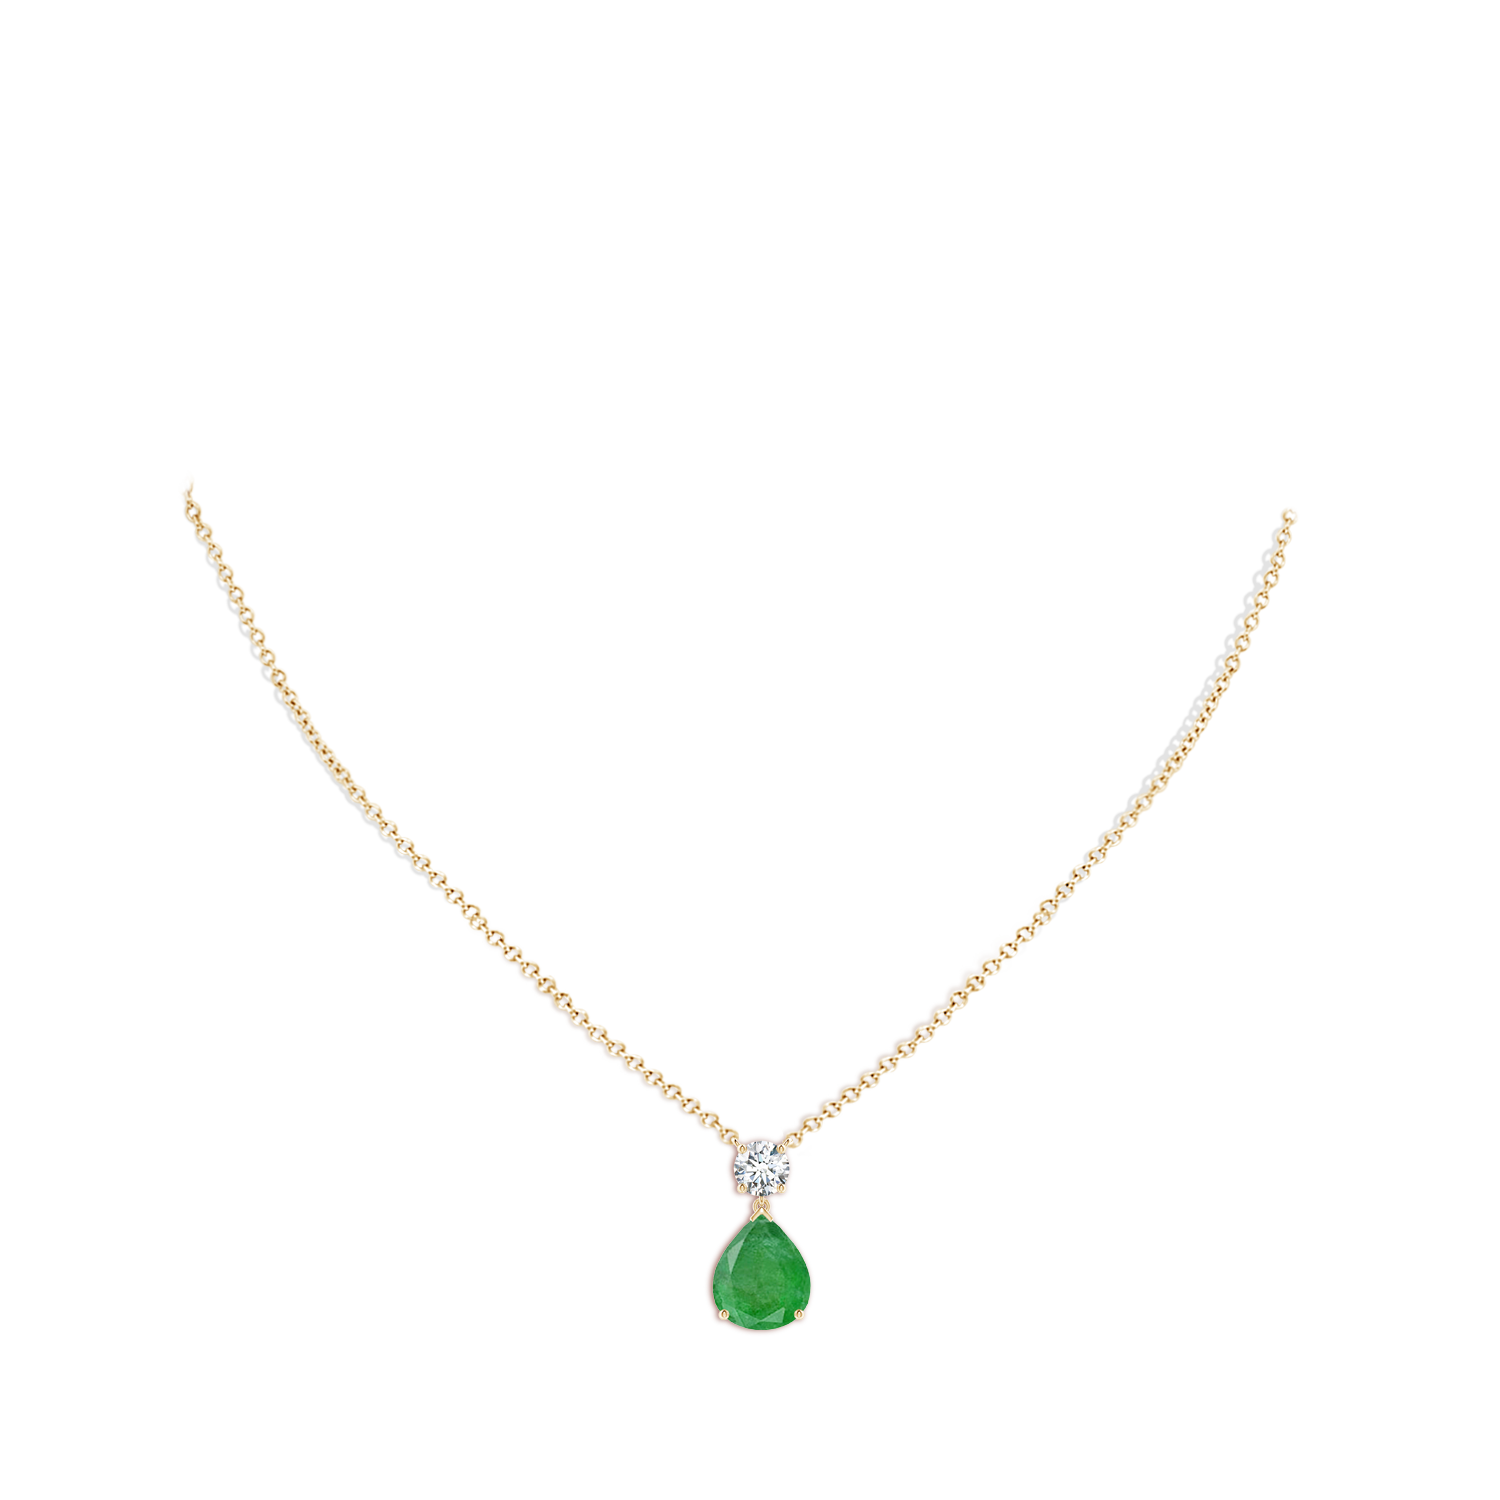 A - Emerald / 5.21 CT / 18 KT Yellow Gold